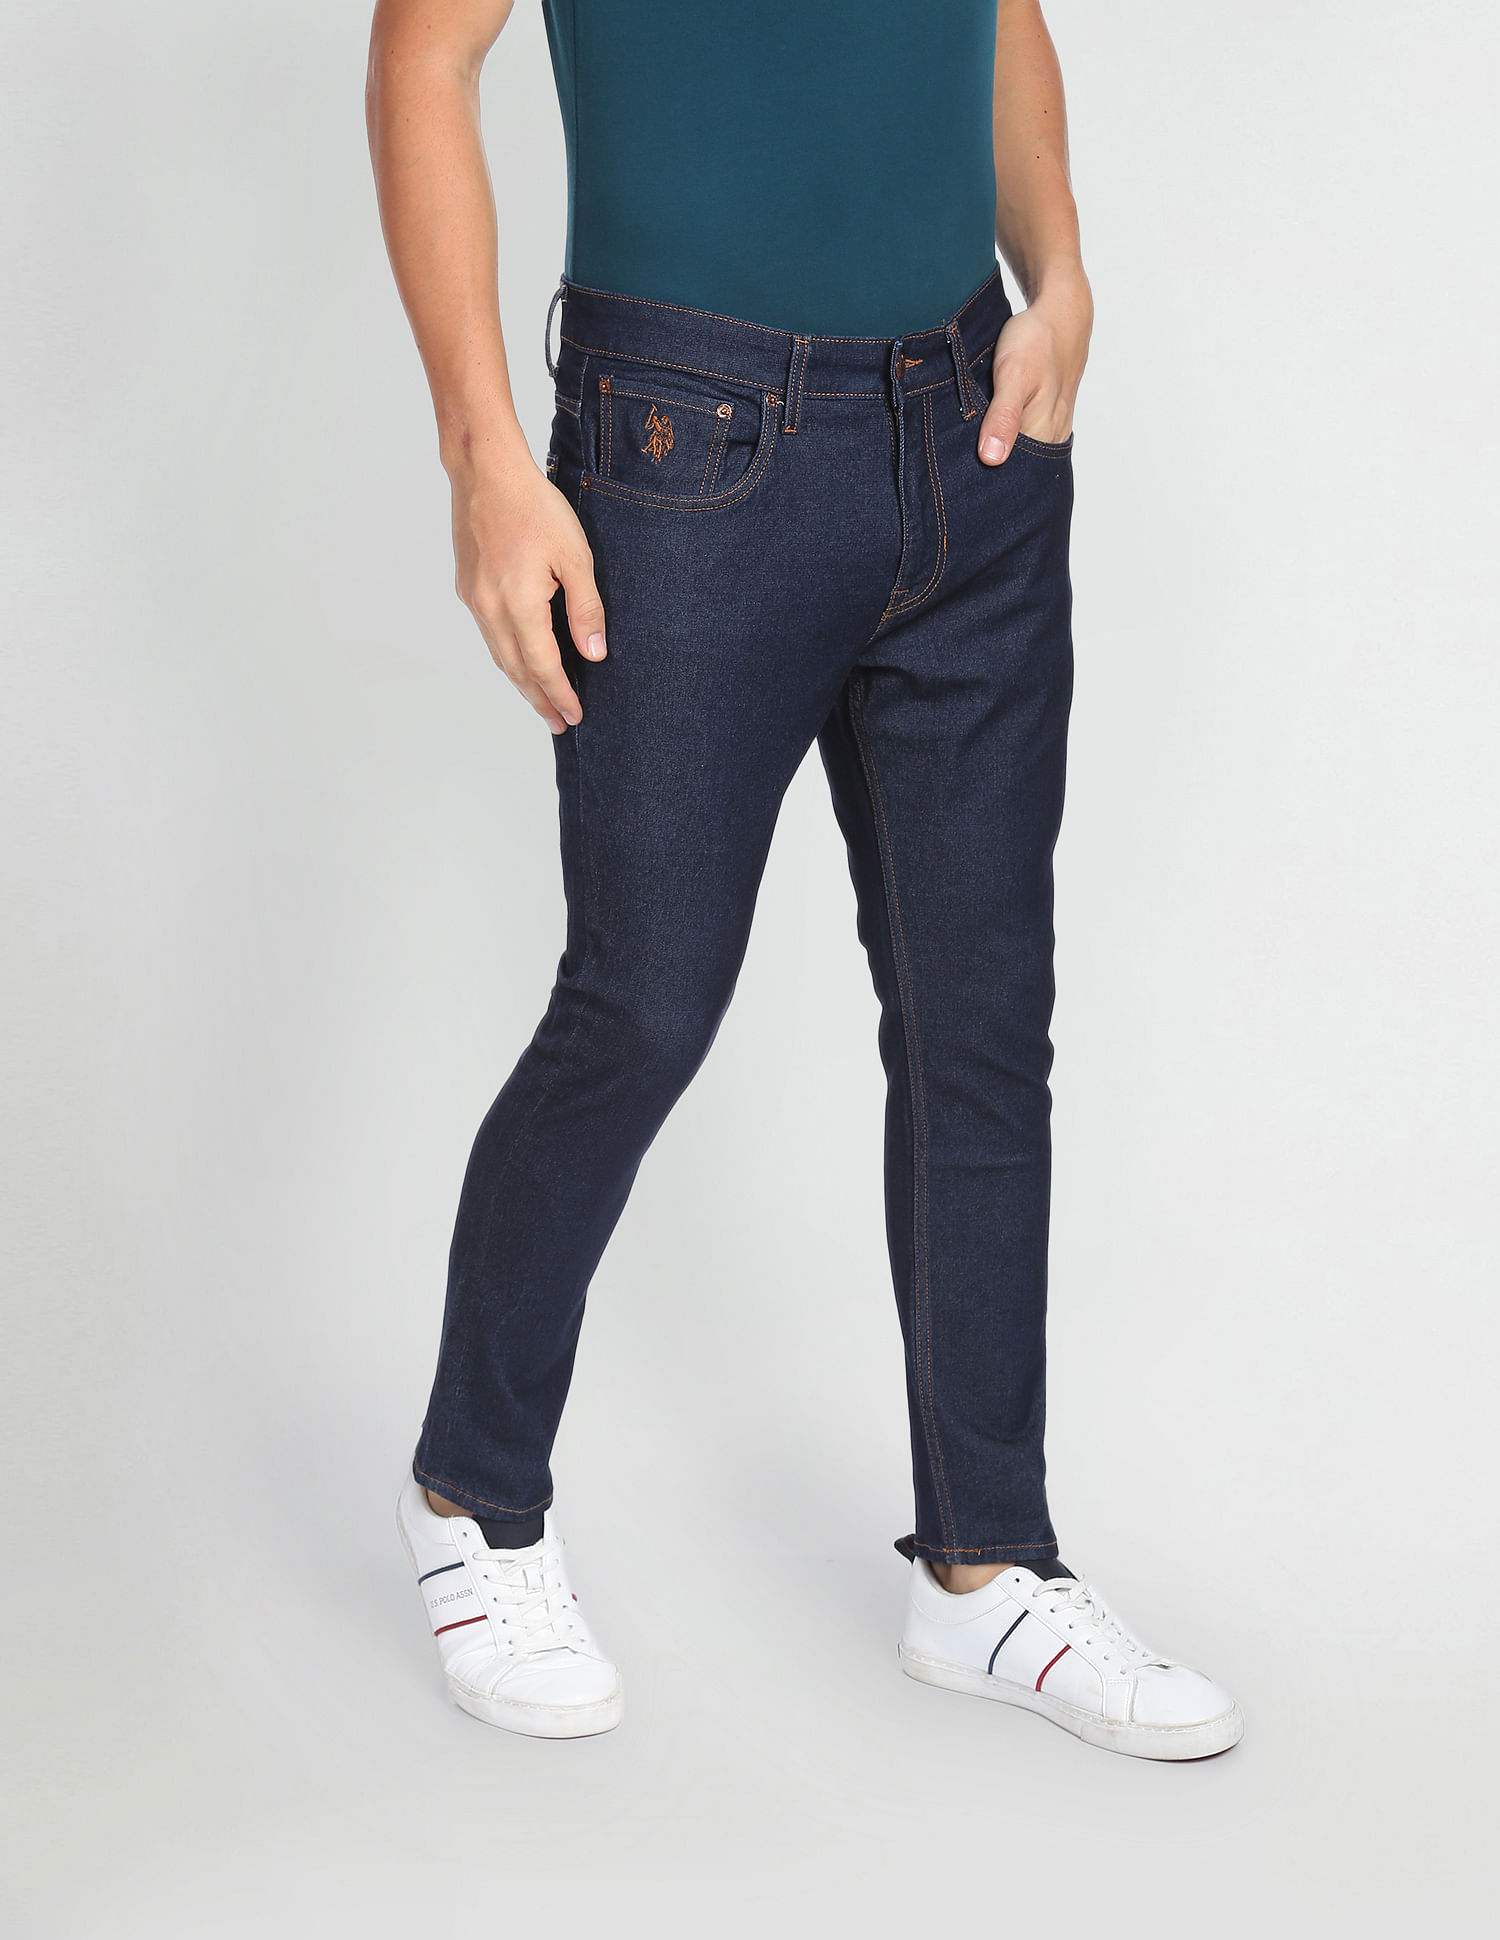 Tapered Washed Technics Comfortable To Wear Fit Mens Denim Jeans Cas No  68603429 at Best Price in Delhi  Cordley Jeans